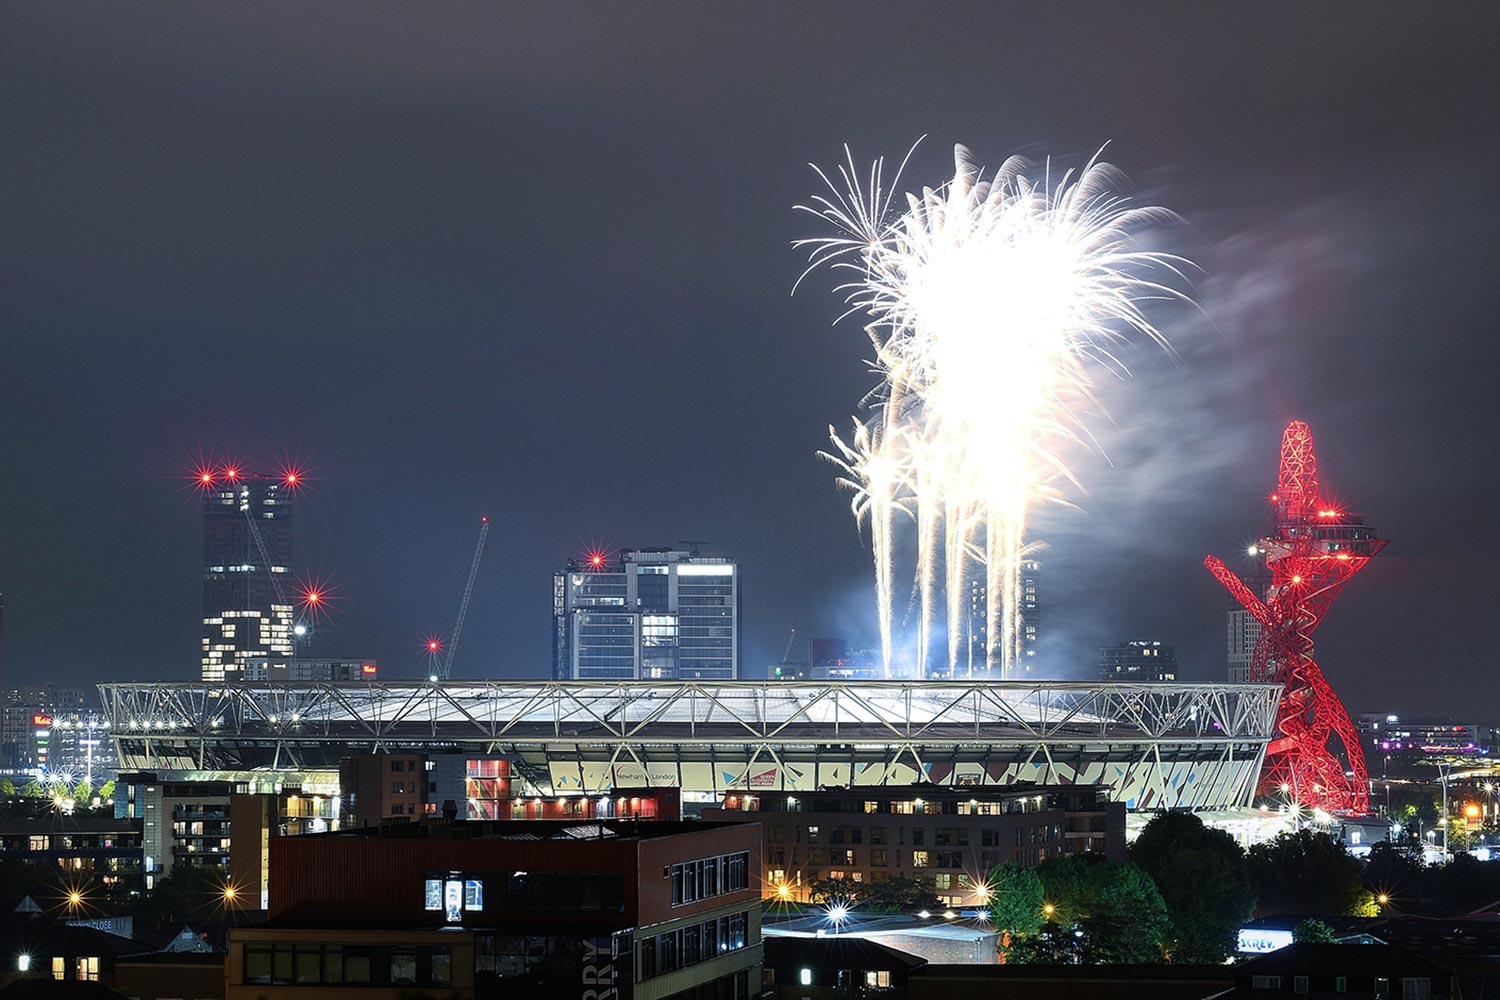 Fireworks at Olympic Park, East London 2017